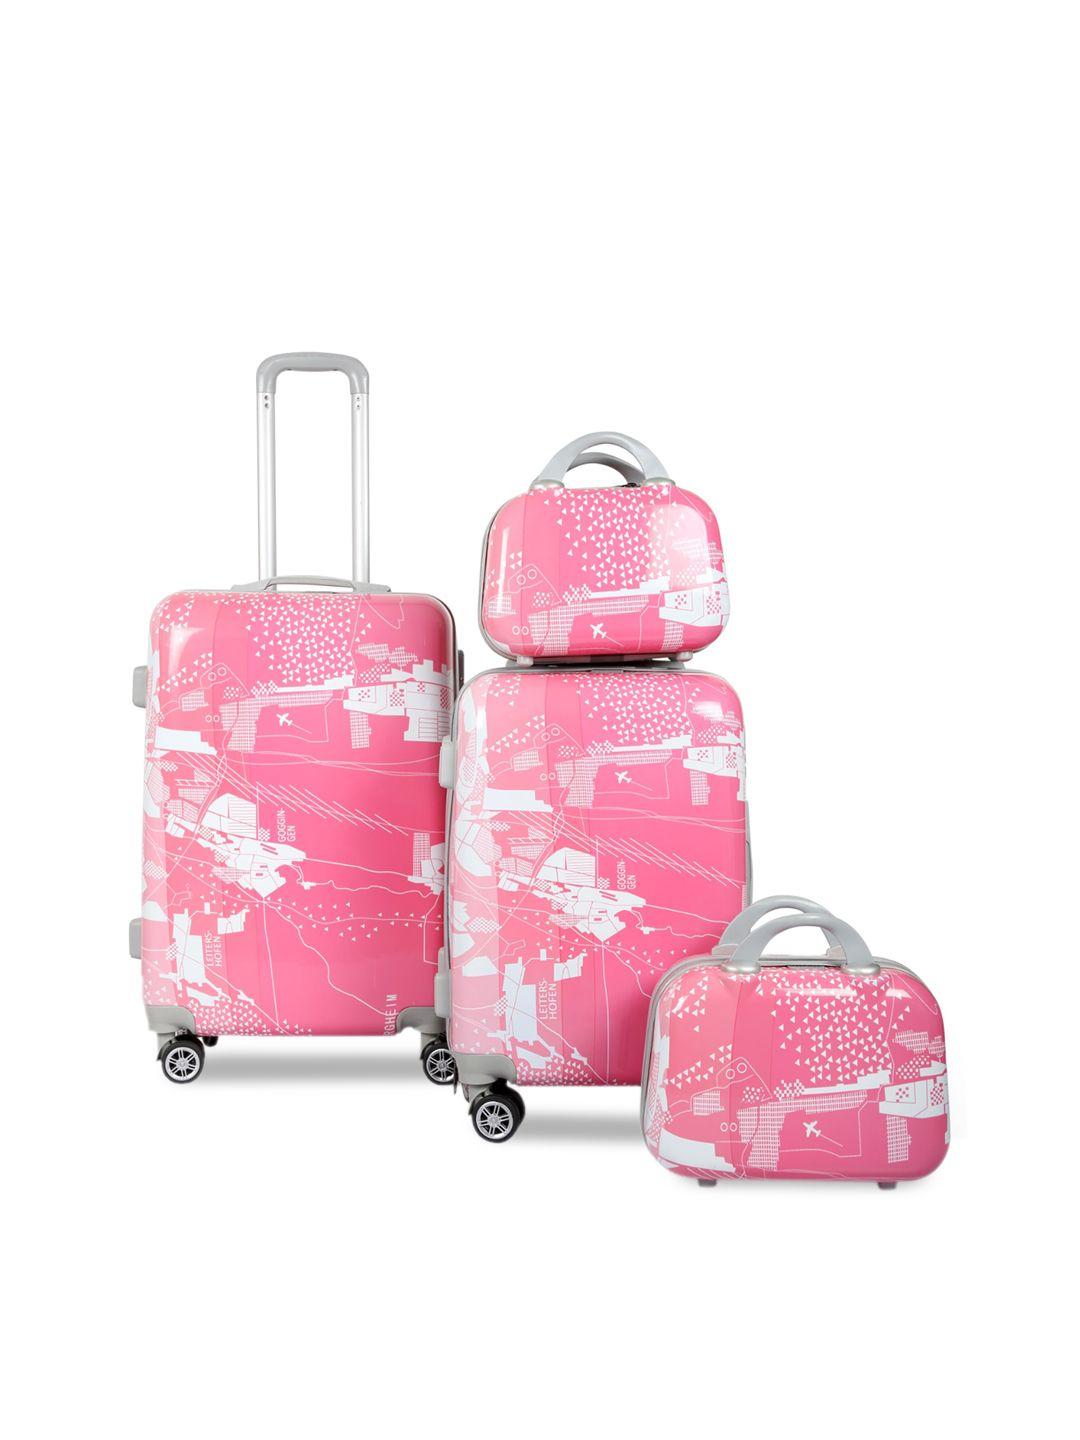 polo class set of 2 pink travel trolley bag with 2 vanity bag